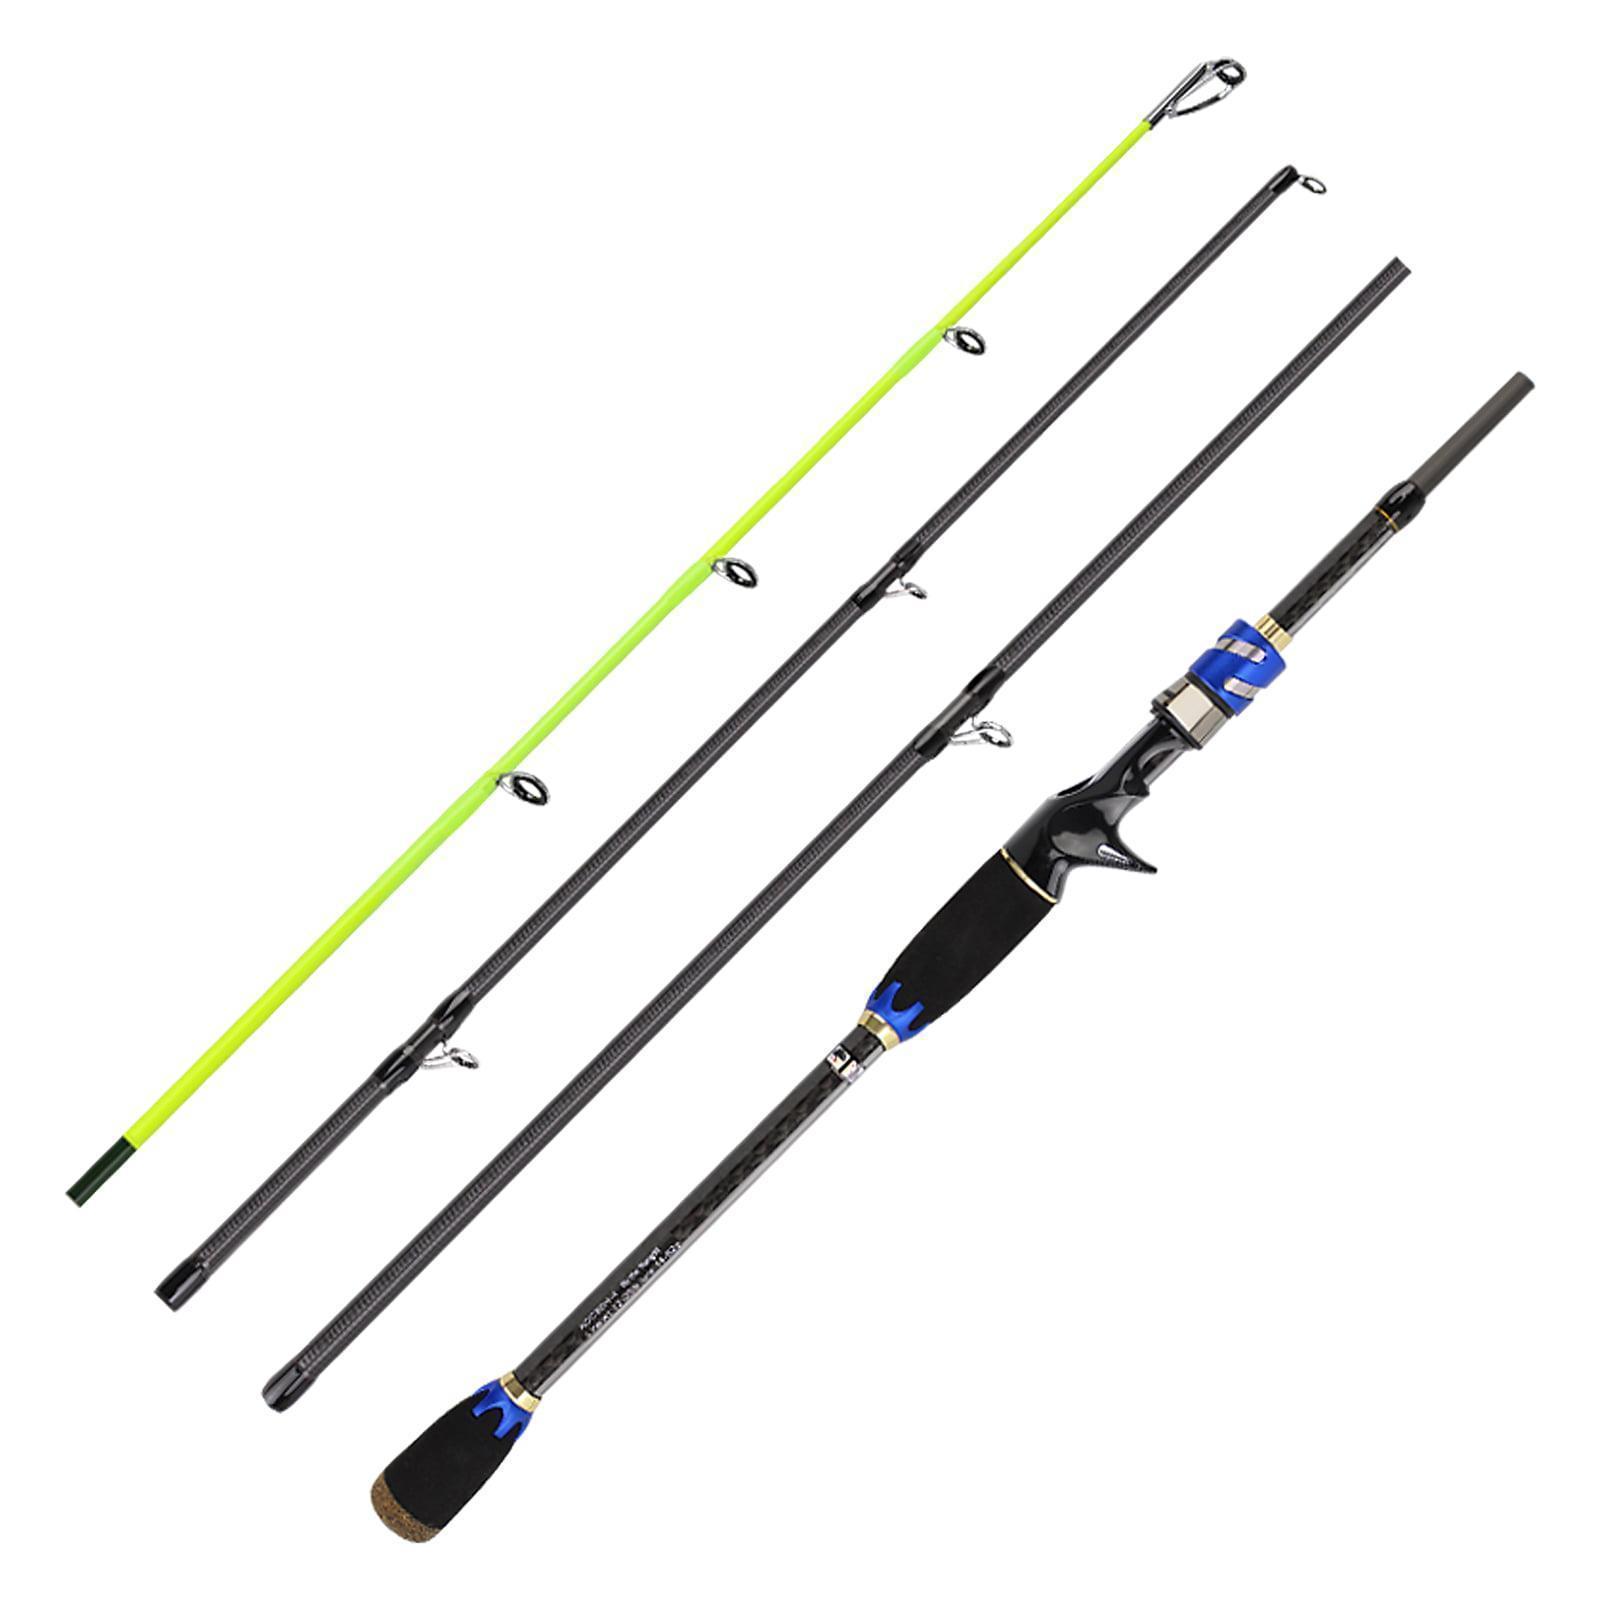 Carbon Fiber Casting Rods Durable Lightweight Casting Fishing Rod Portable 4 Sections   Fishing Pole for Saltwater Freshwater Promo